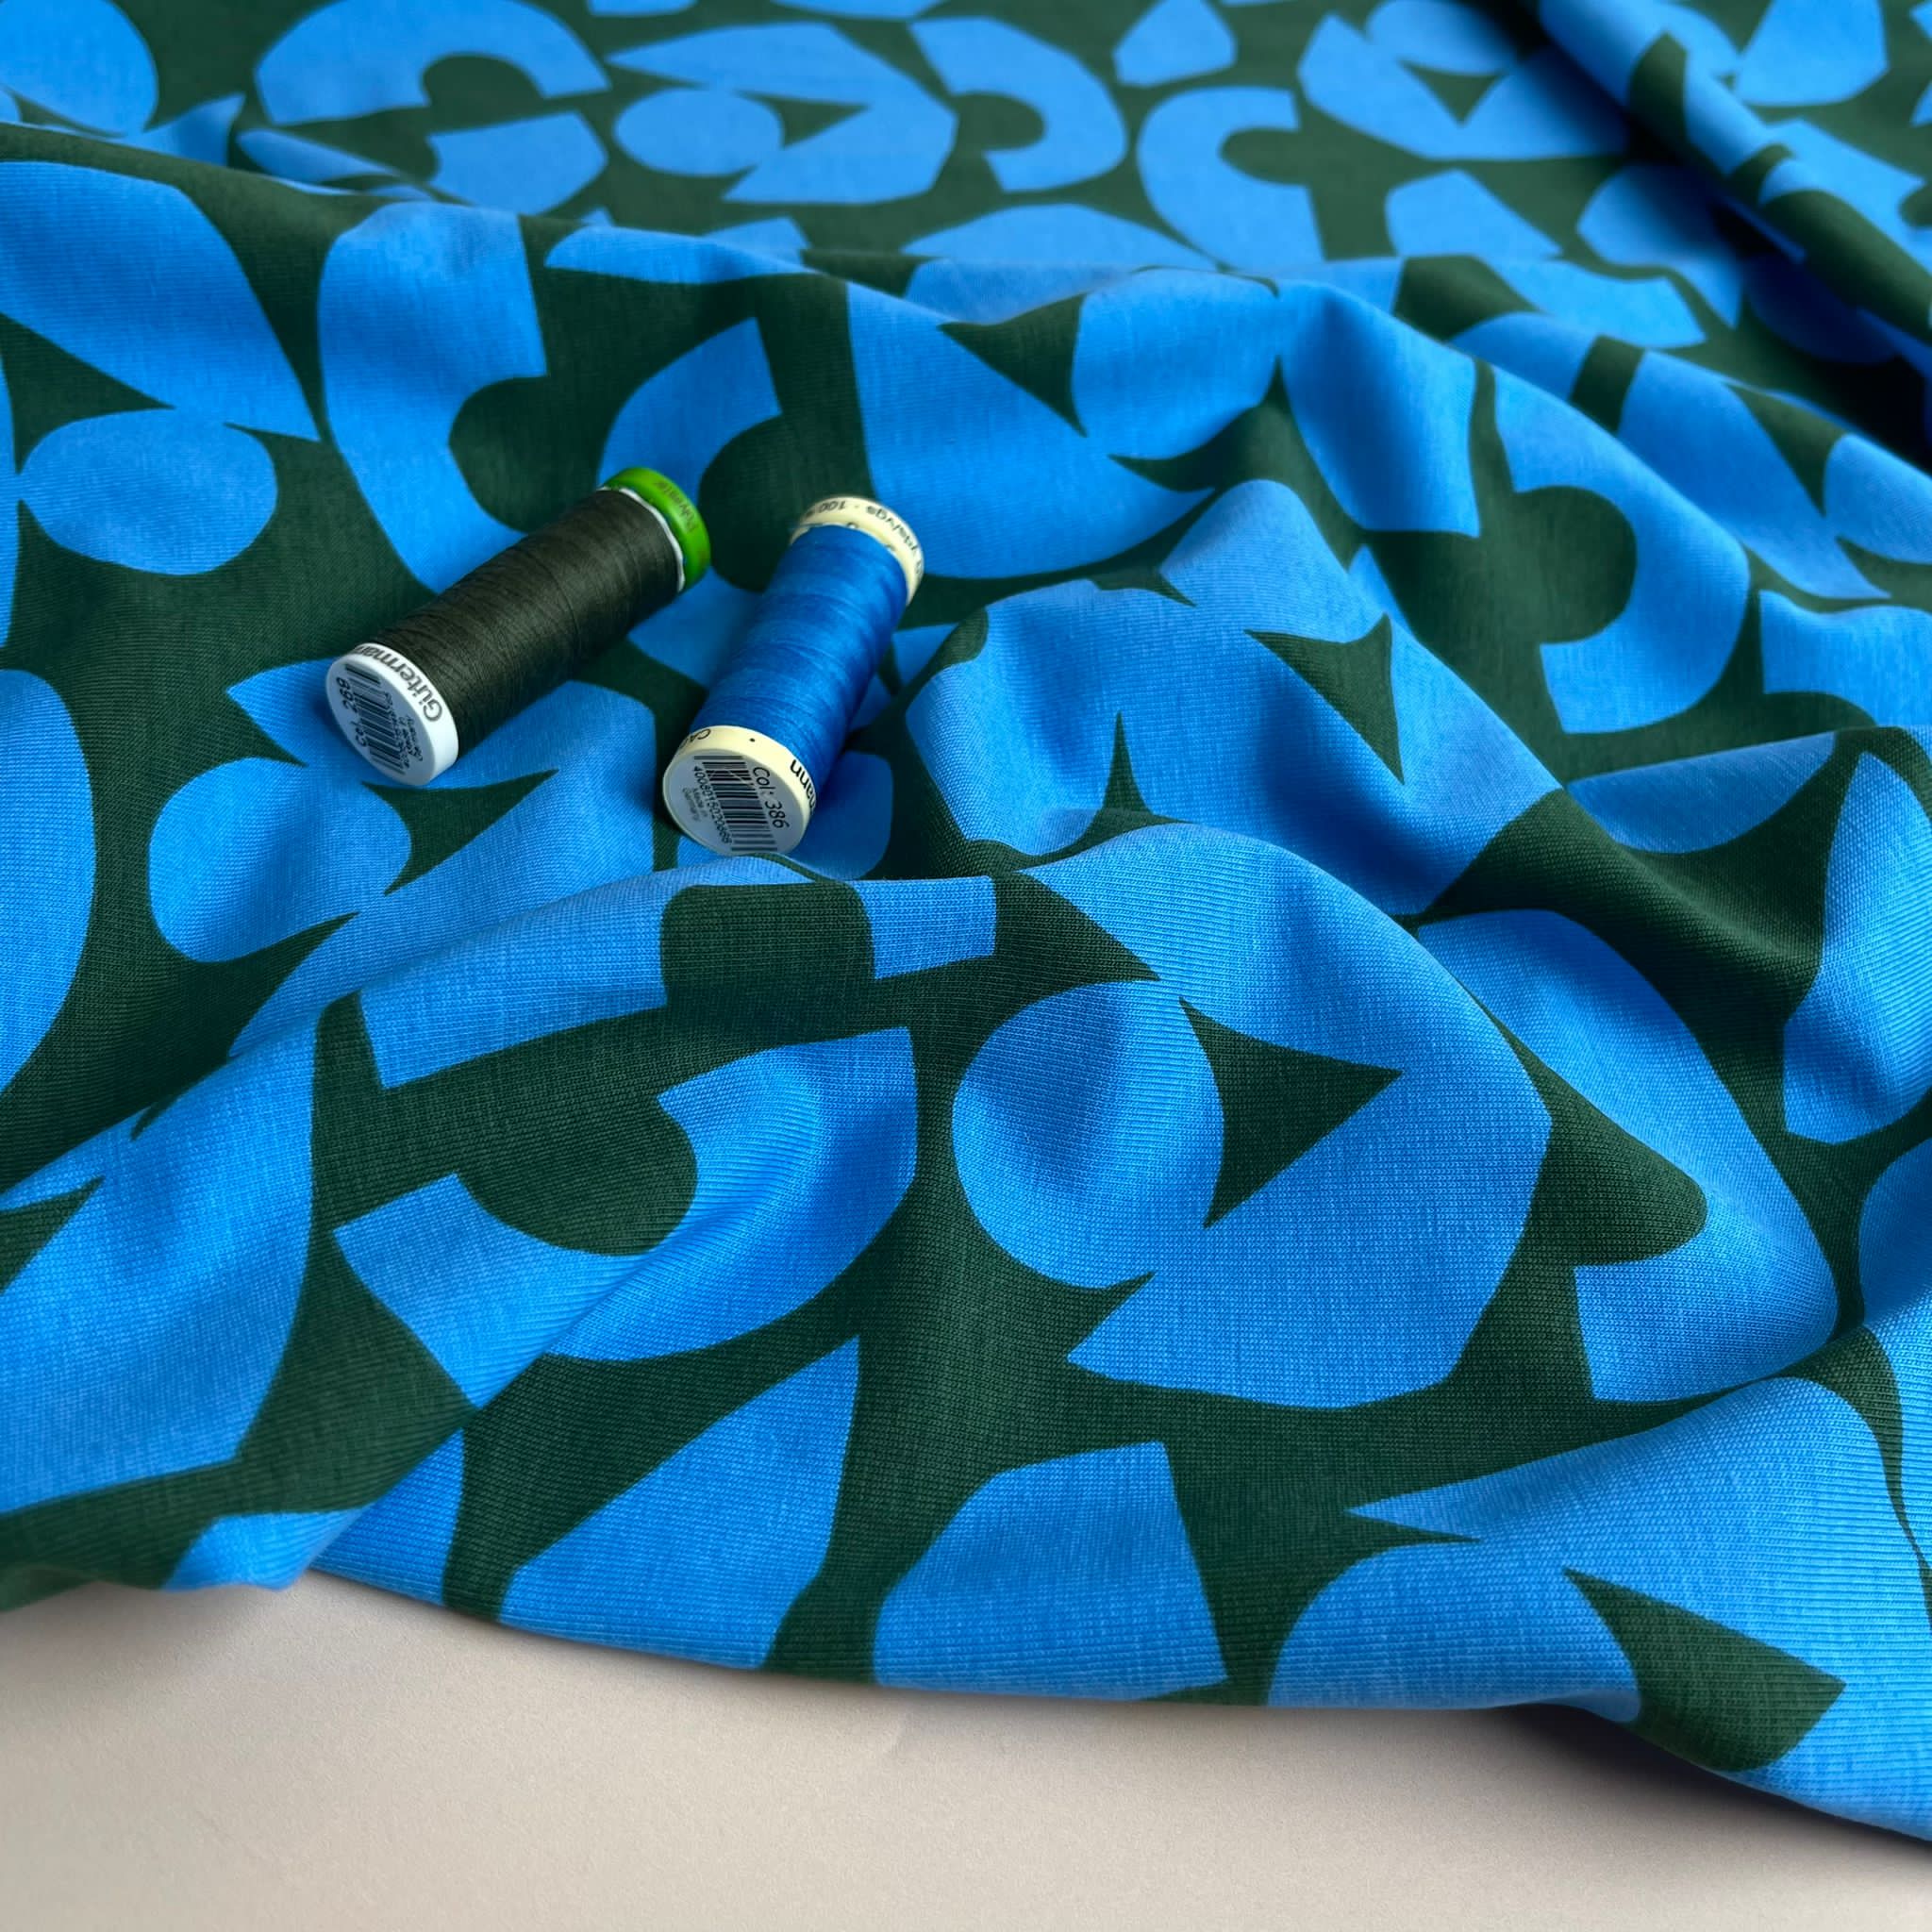 Blue Shapes on Khaki Combed Cotton Jersey Fabric